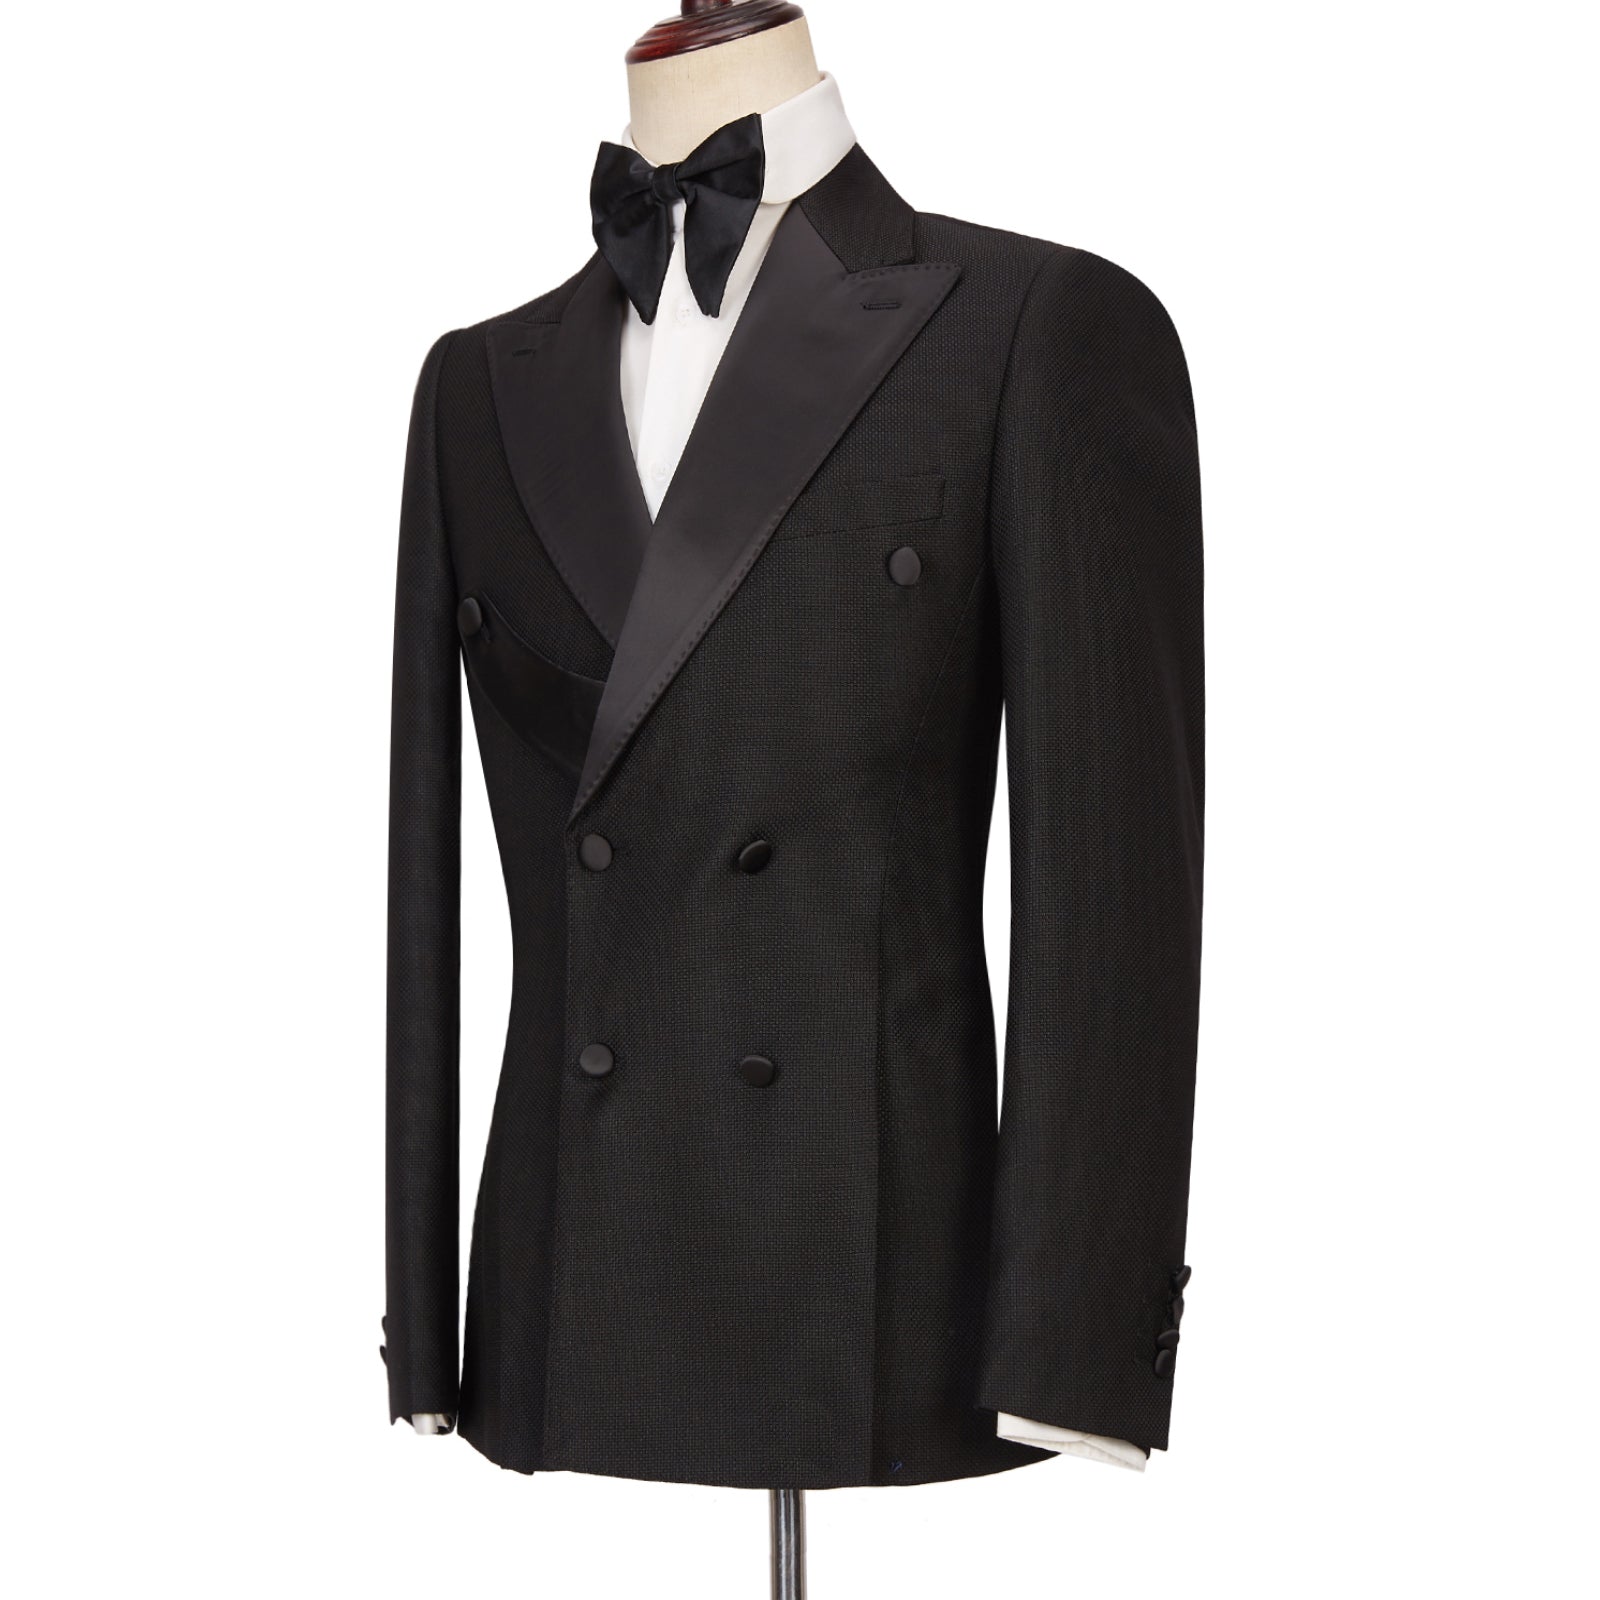 Gavin Latest Design Men's Suits: Black Double Breasted Peaked Lapel Best Fitted